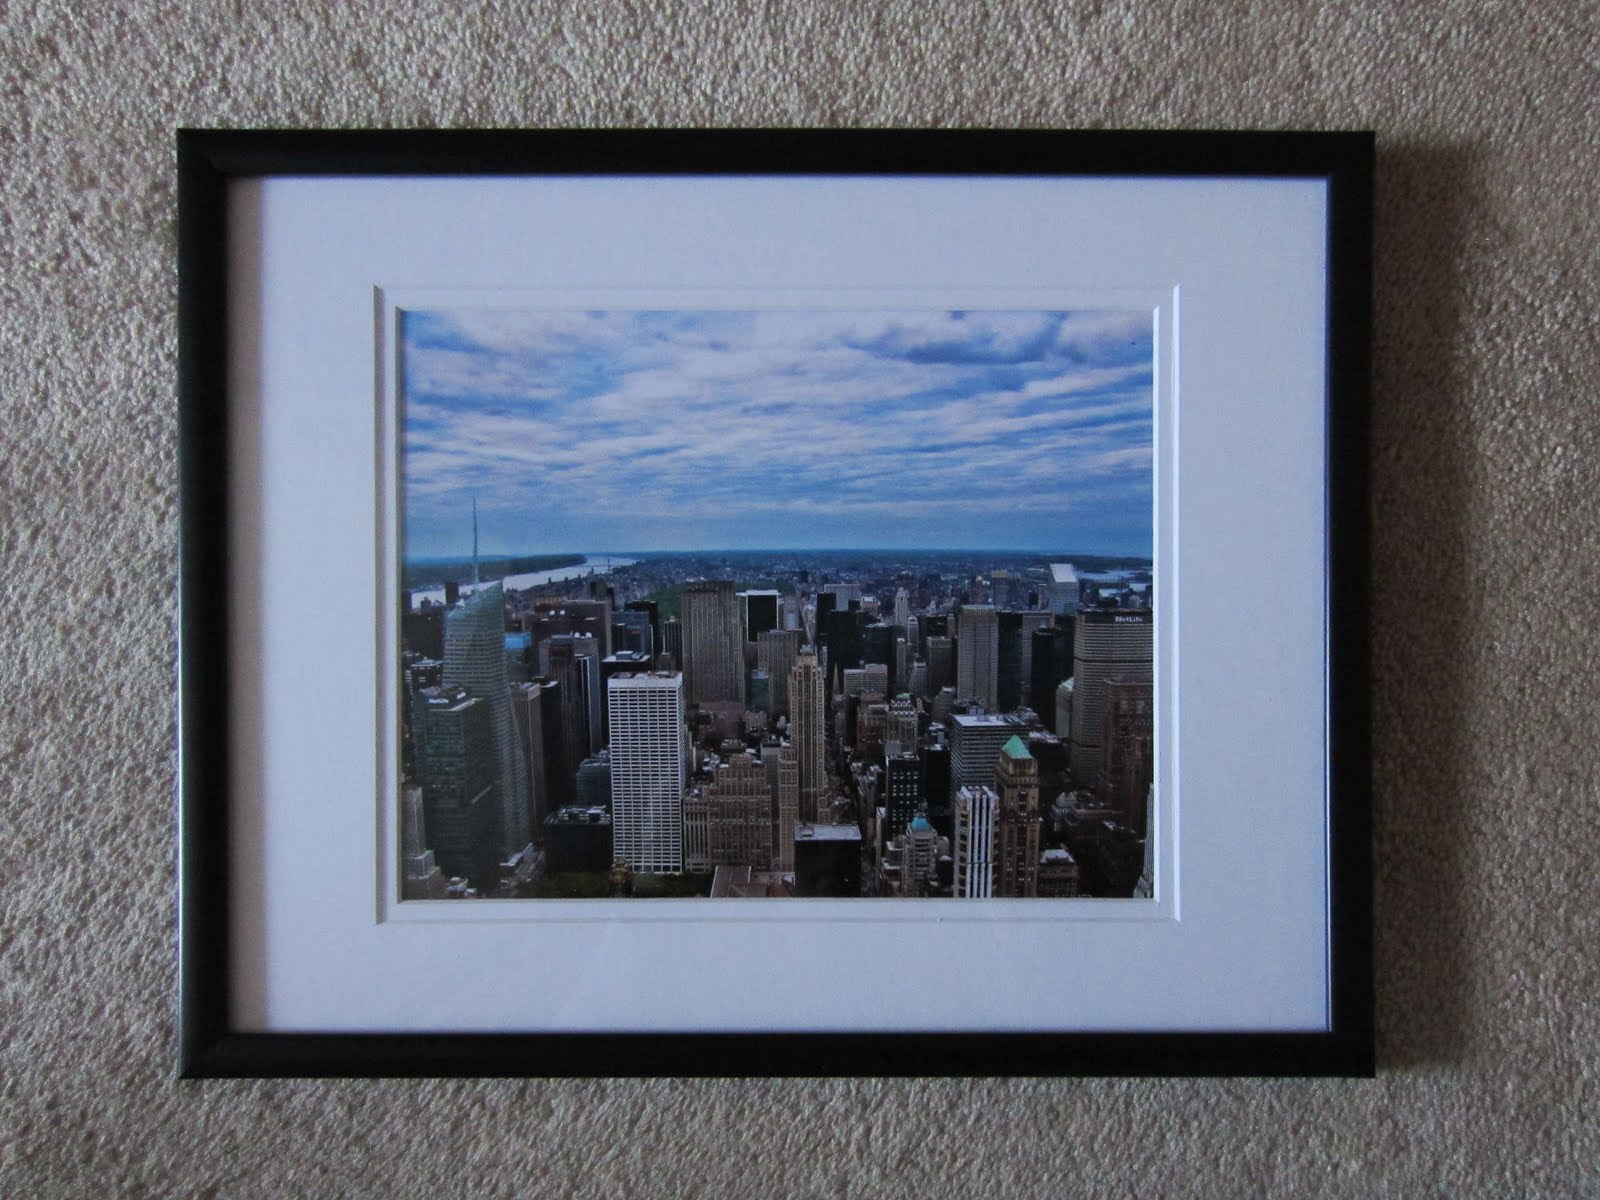 ... cheap ish but reasonably nice michael s 8x10 frame with included mat